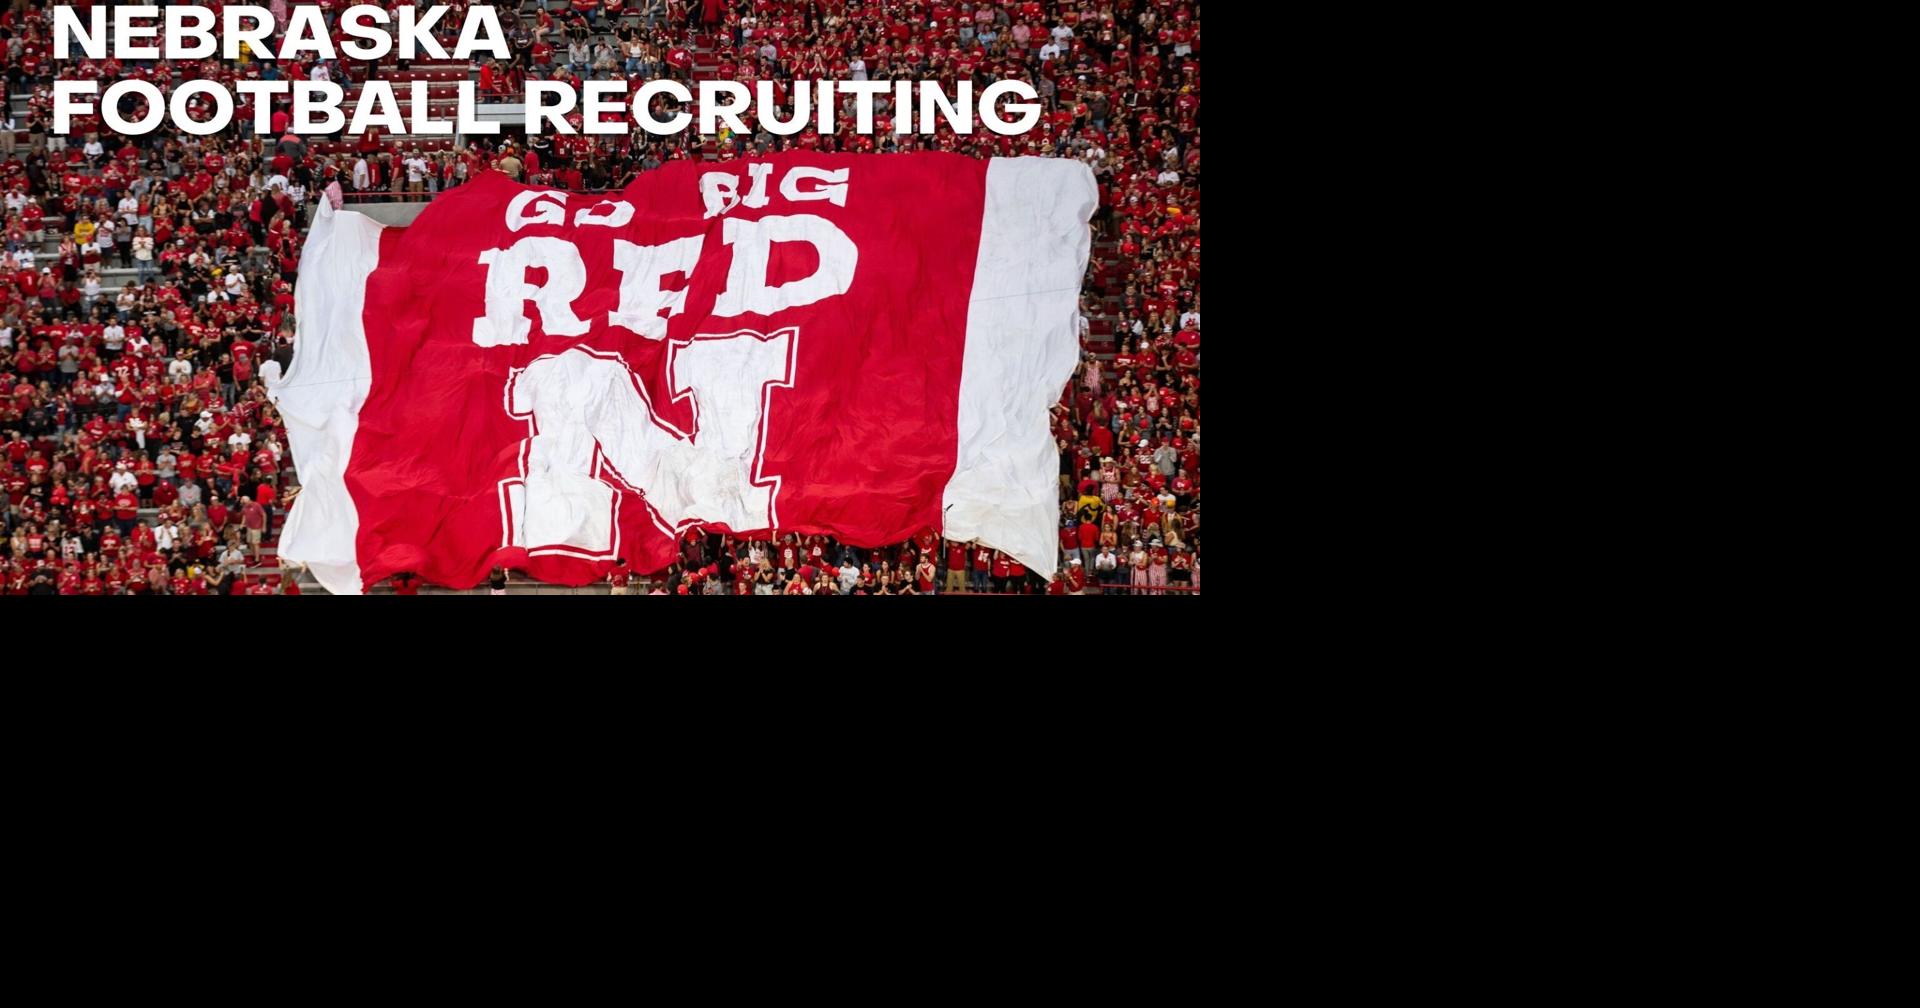 Willis McGahee IV, son of former NFL RB, commits to Nebraska